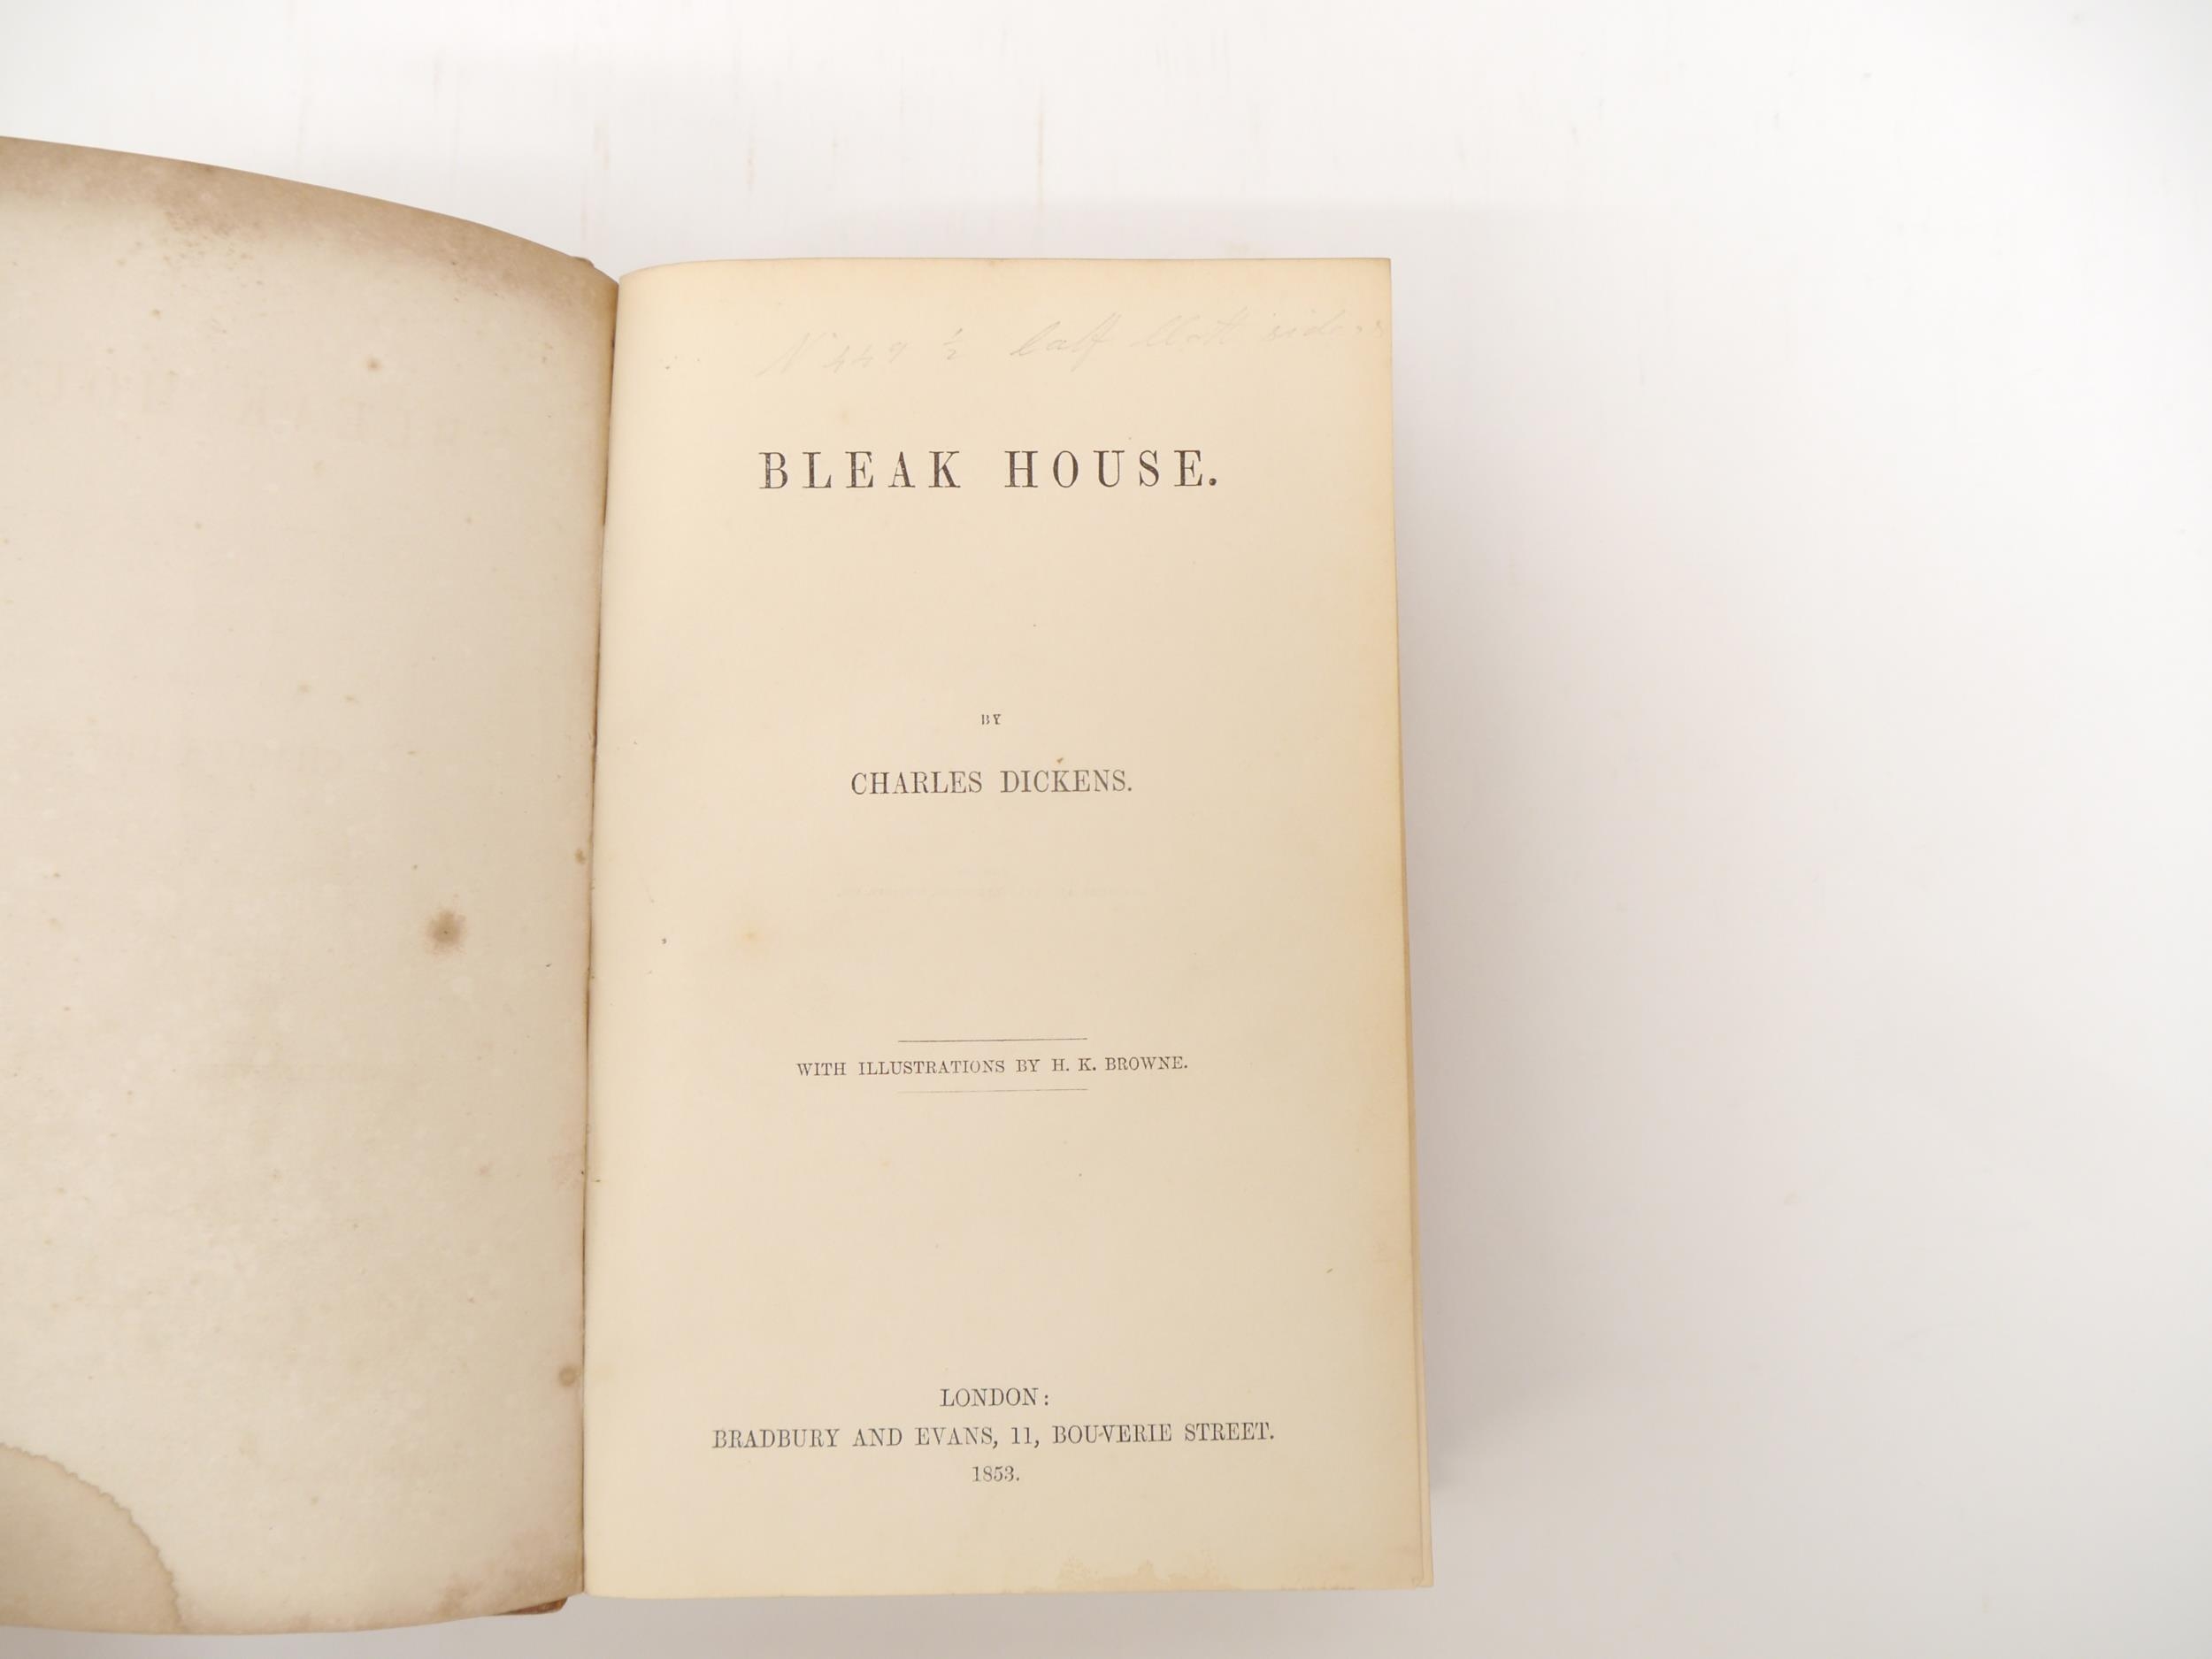 Charles Dickens: 'Bleak House', London, Bradbury & Evans, 1853, 1st edition in book form, conforms - Image 2 of 5